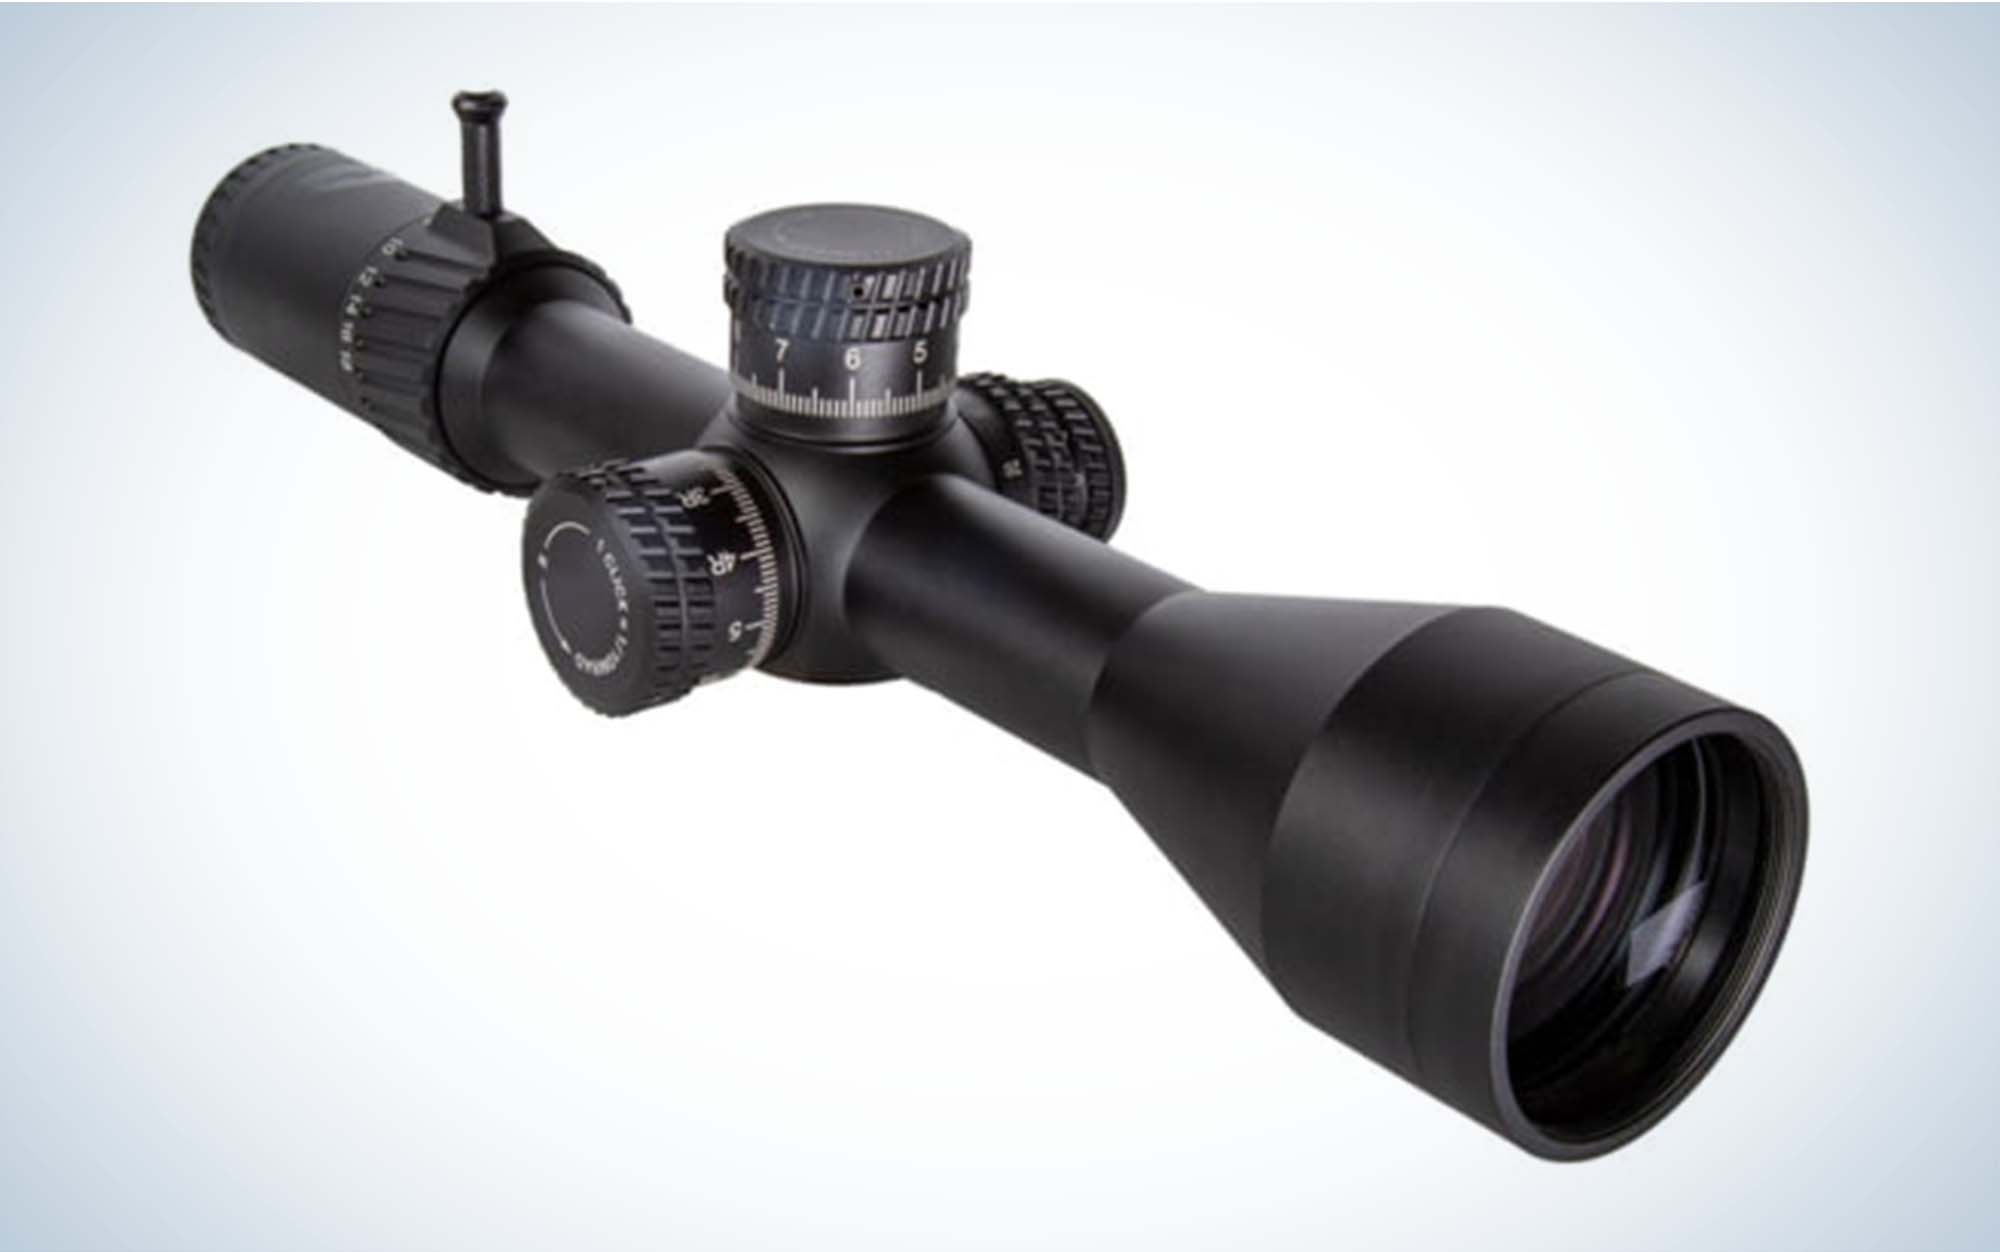 The Sightmark Presidio 3-18x50 LR2 is the best first focal place rifle scope.